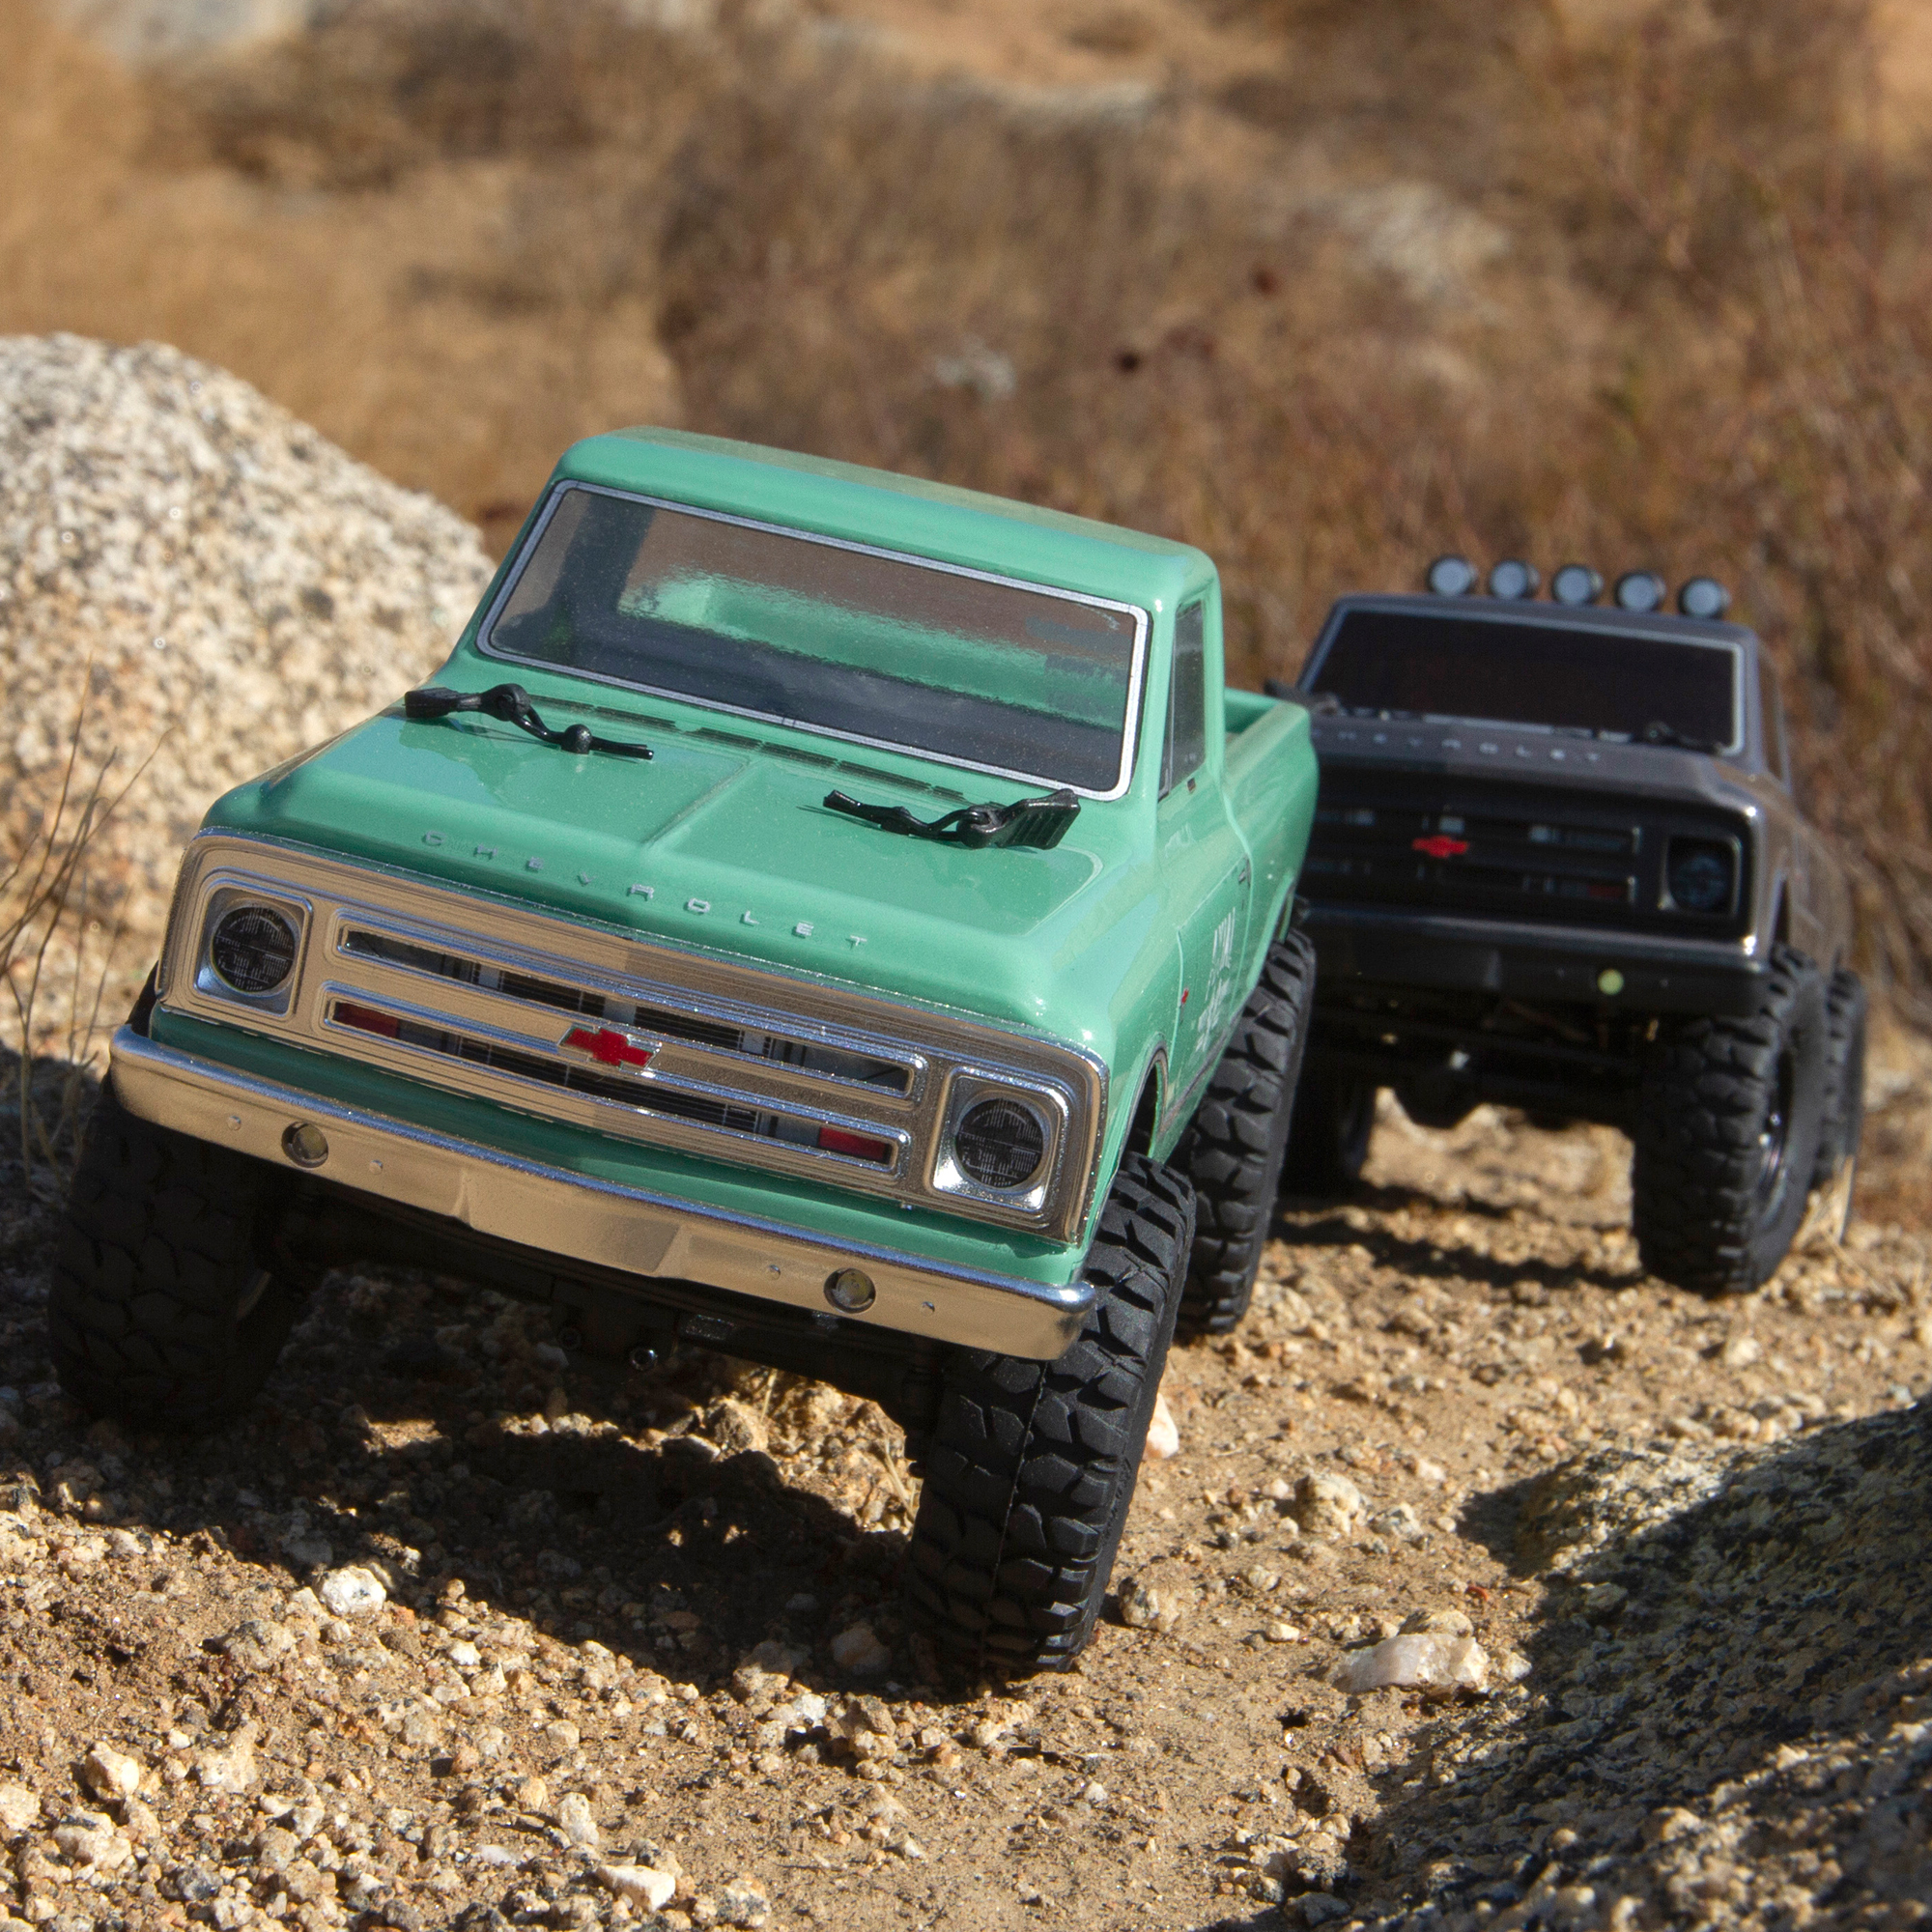 Axial 1/24 SCX24 1967 Chevrolet C10 4 Wheel Drive Truck Brushed RTR Ready to Run Green AXI00001T1 Trucks Electric RTR Other - image 4 of 9